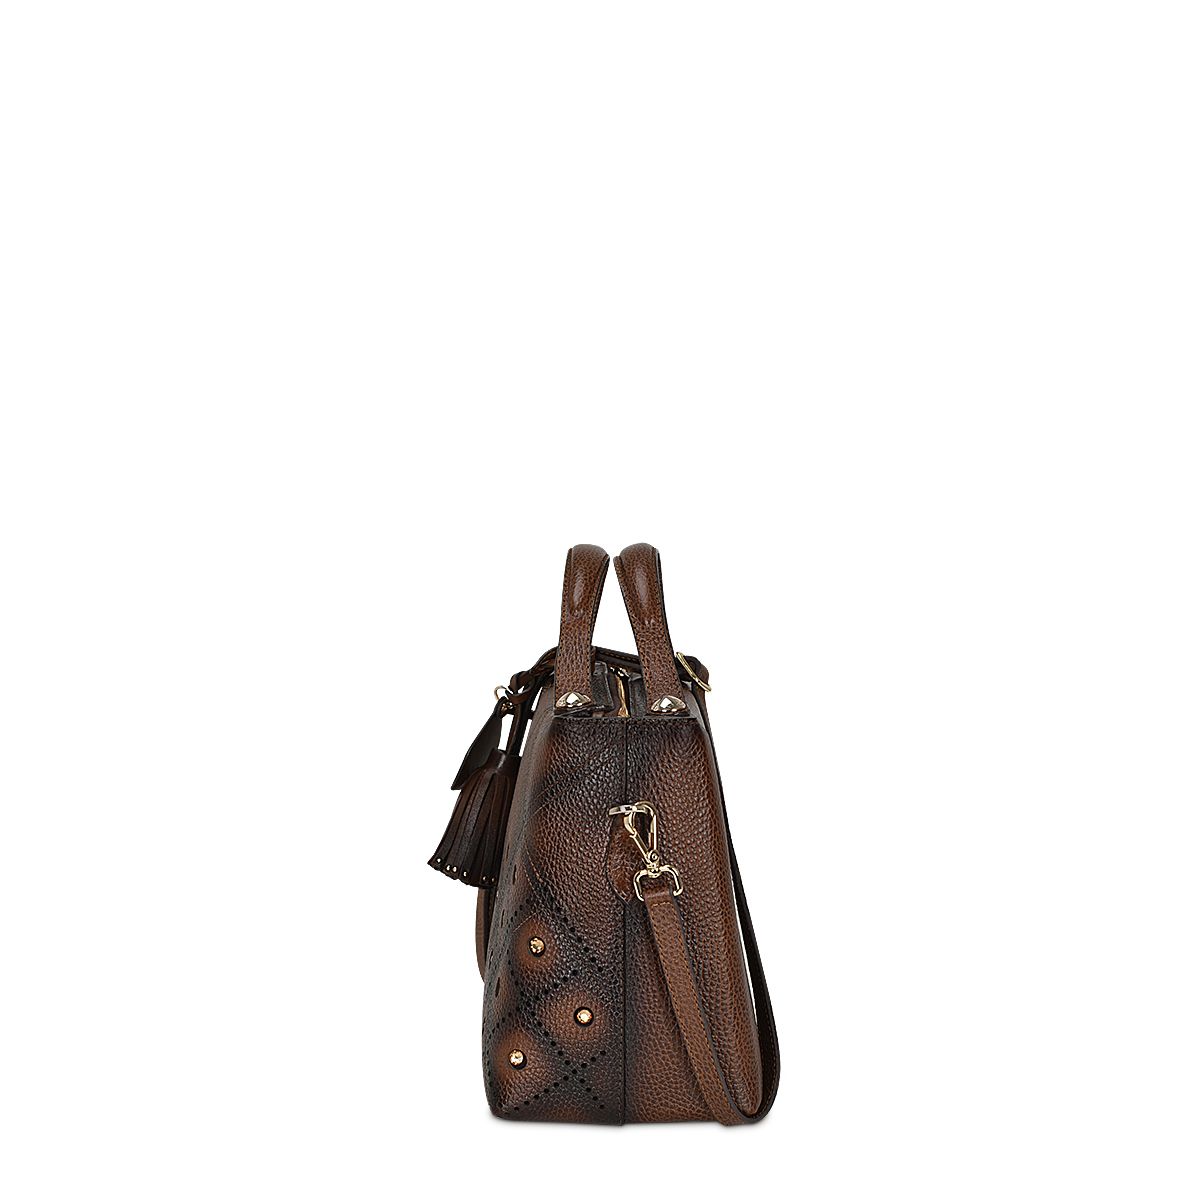 BOD56RS - Cuadra chocolate casual fashion bag in cowhide leather for woman-Kuet.us